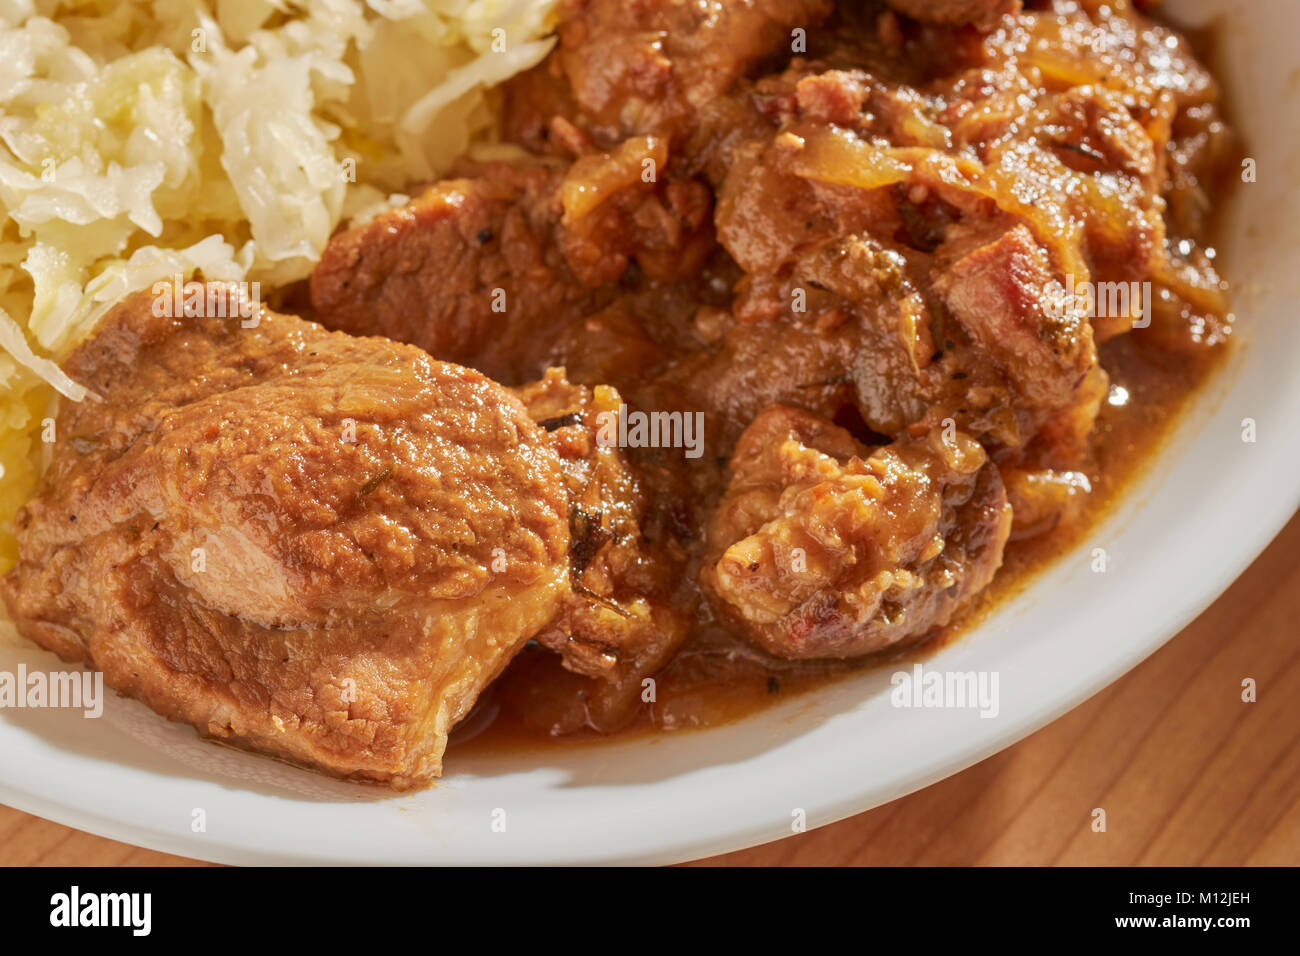 Pennsylvania Dutch style braised pork and sauerkraut, a traditional dish on New Year's Day Stock Photo